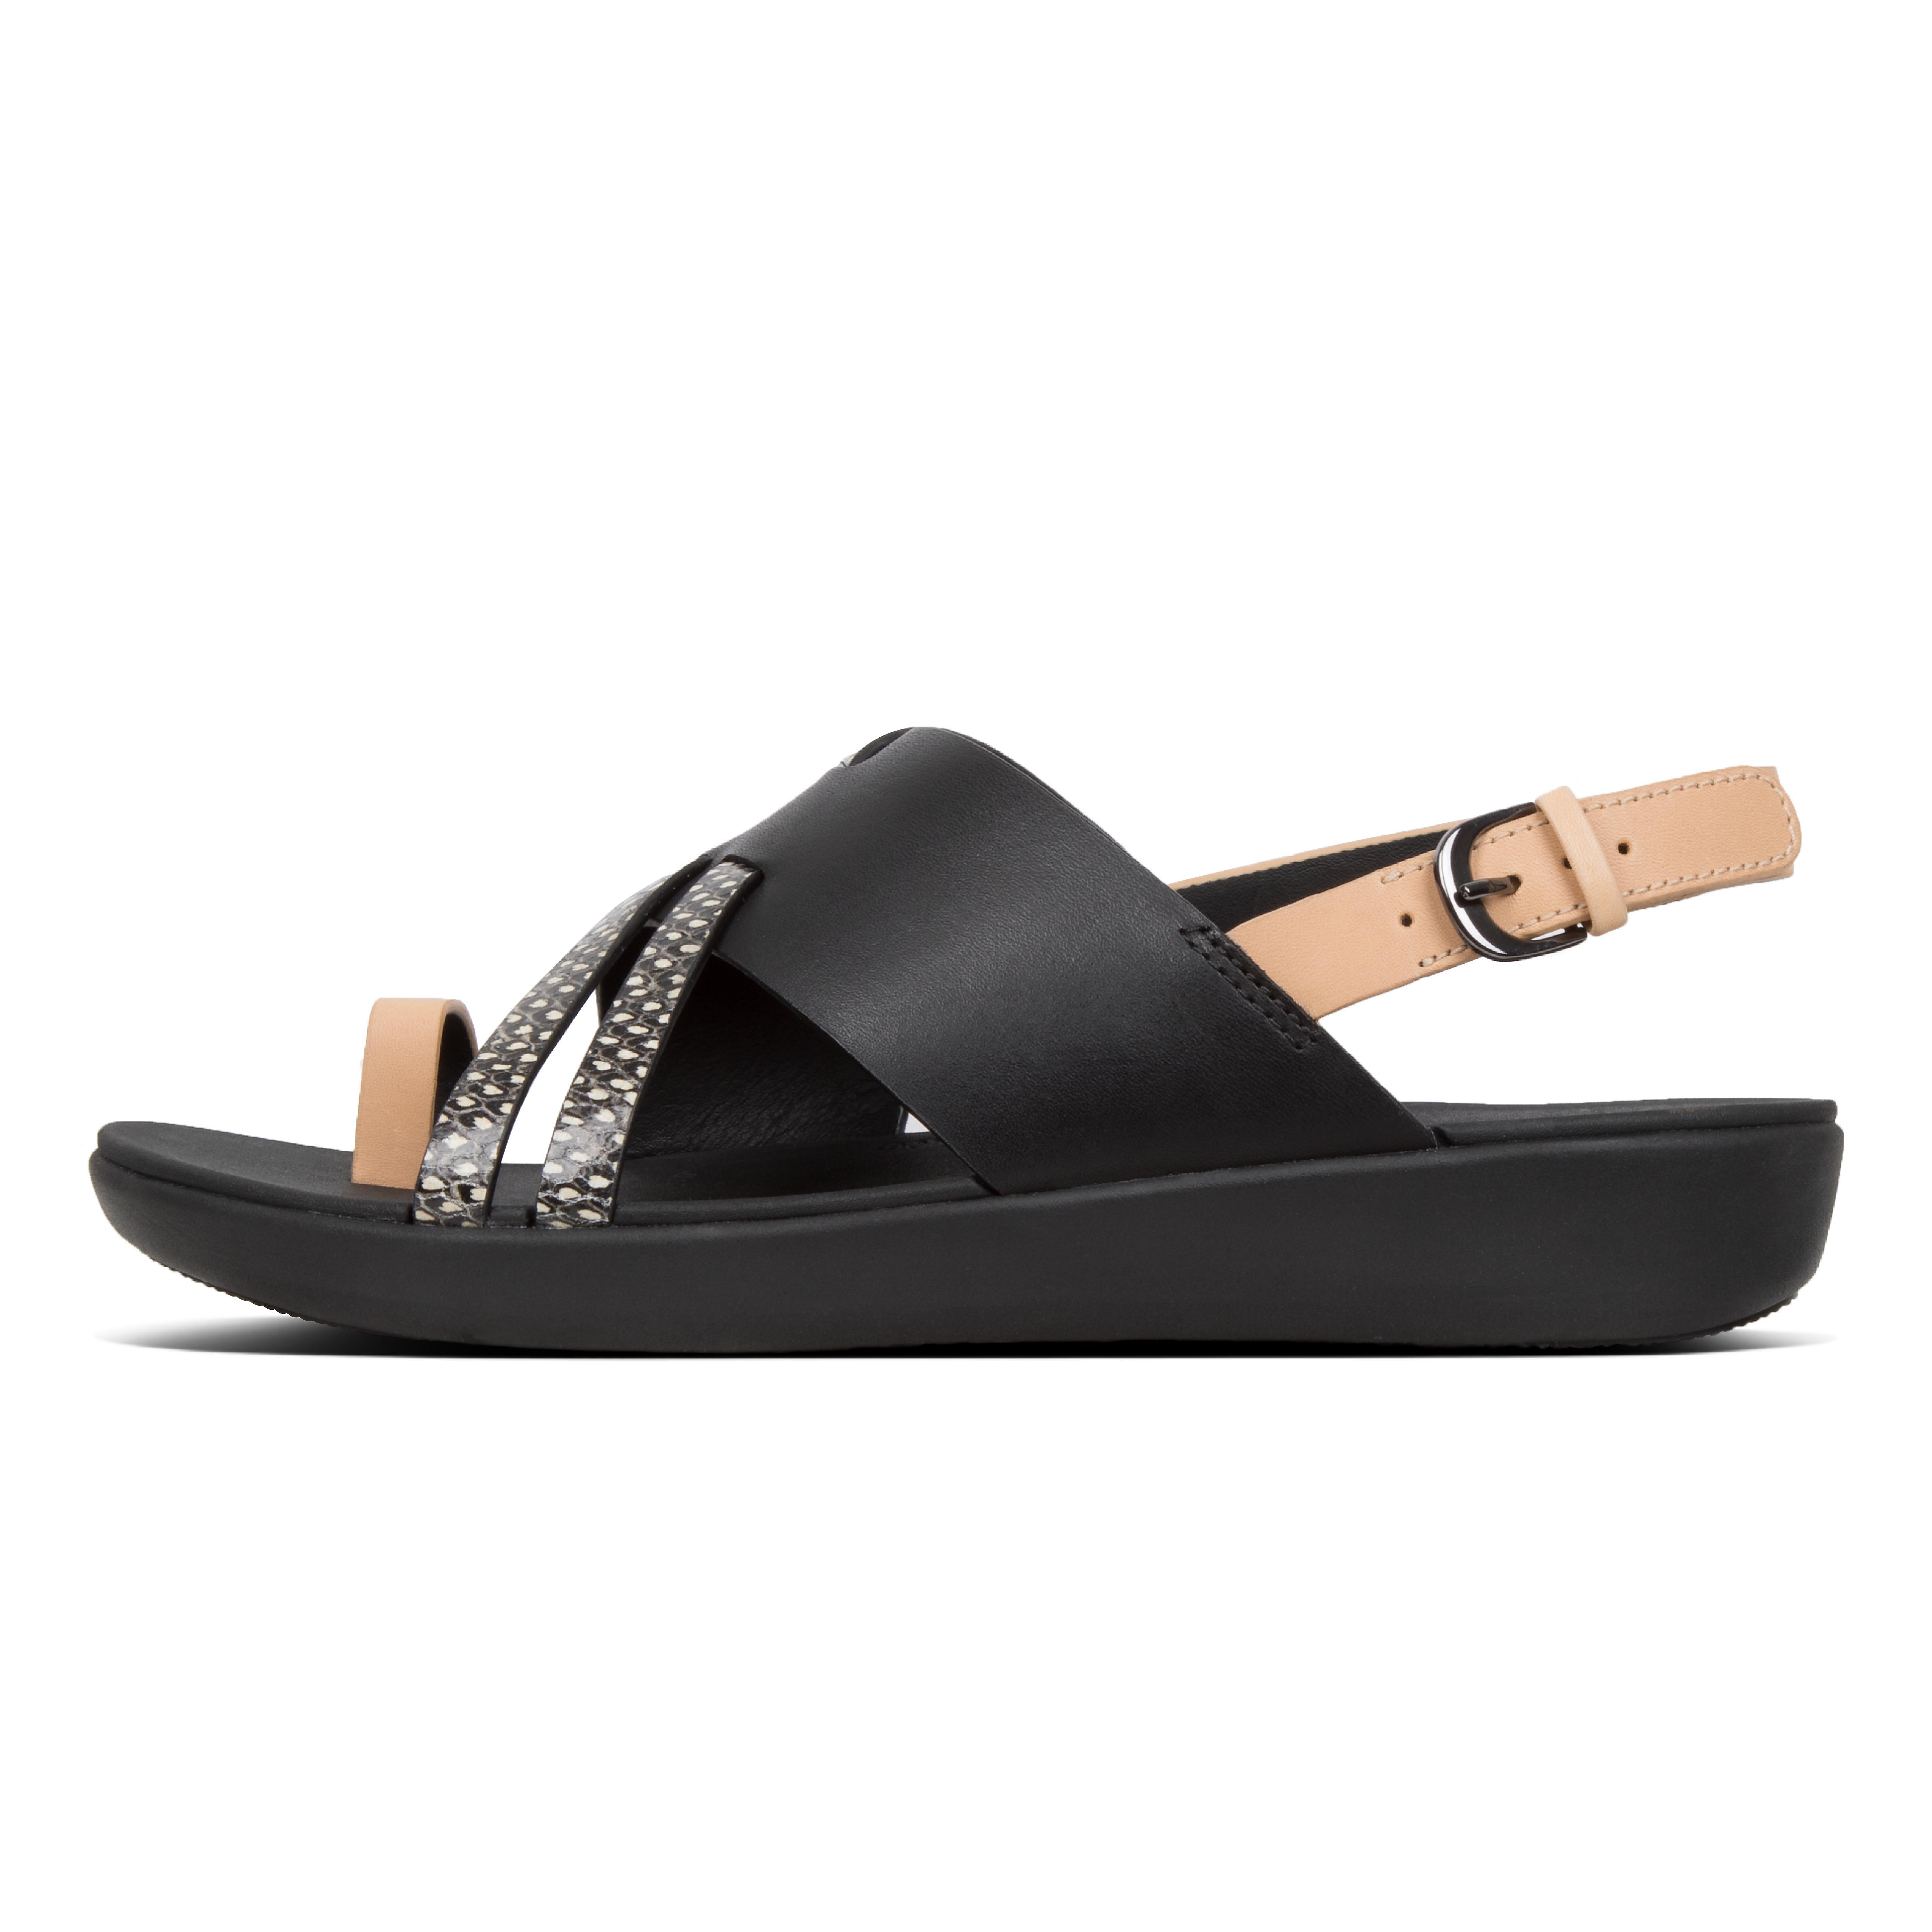 Women's LOOPY Leather Back-Strap-Sandals